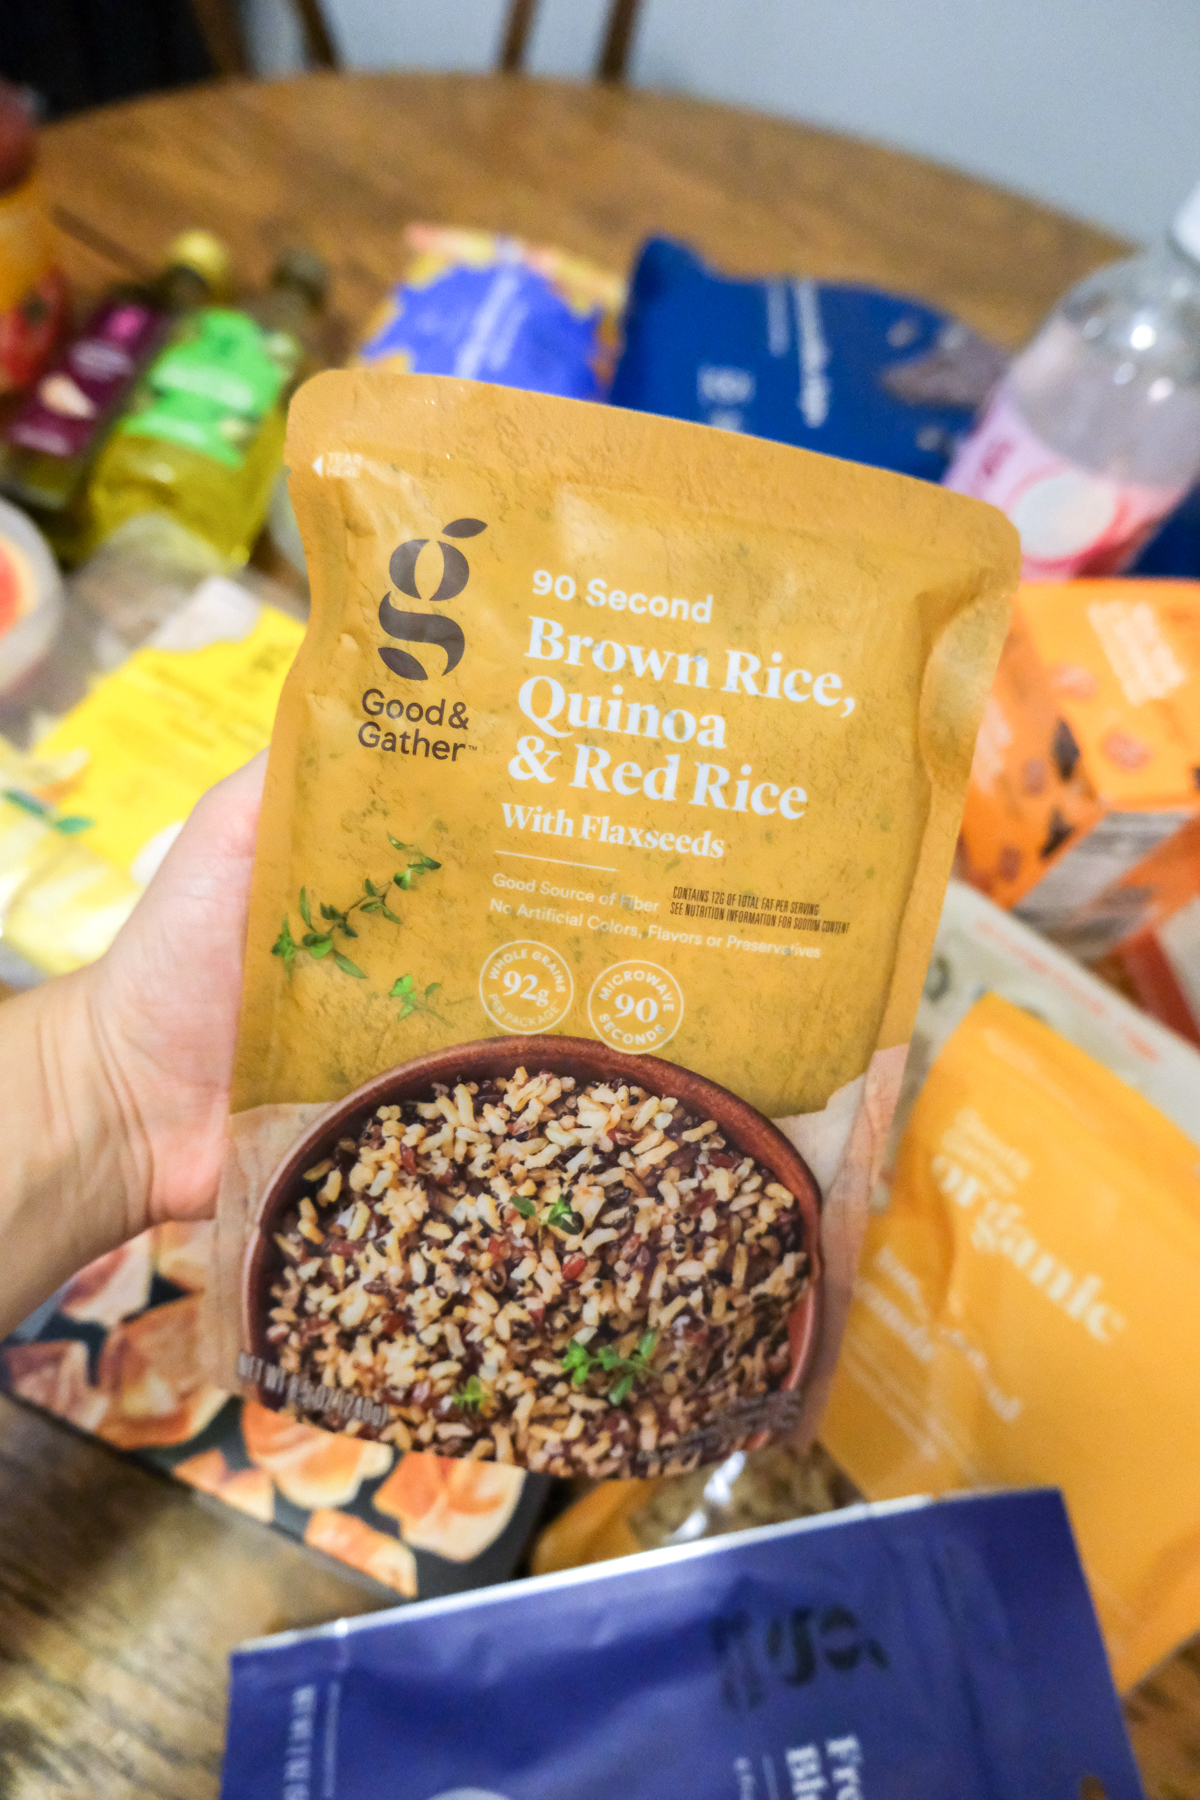 brown rice quinoa mix Good & Gather from Target